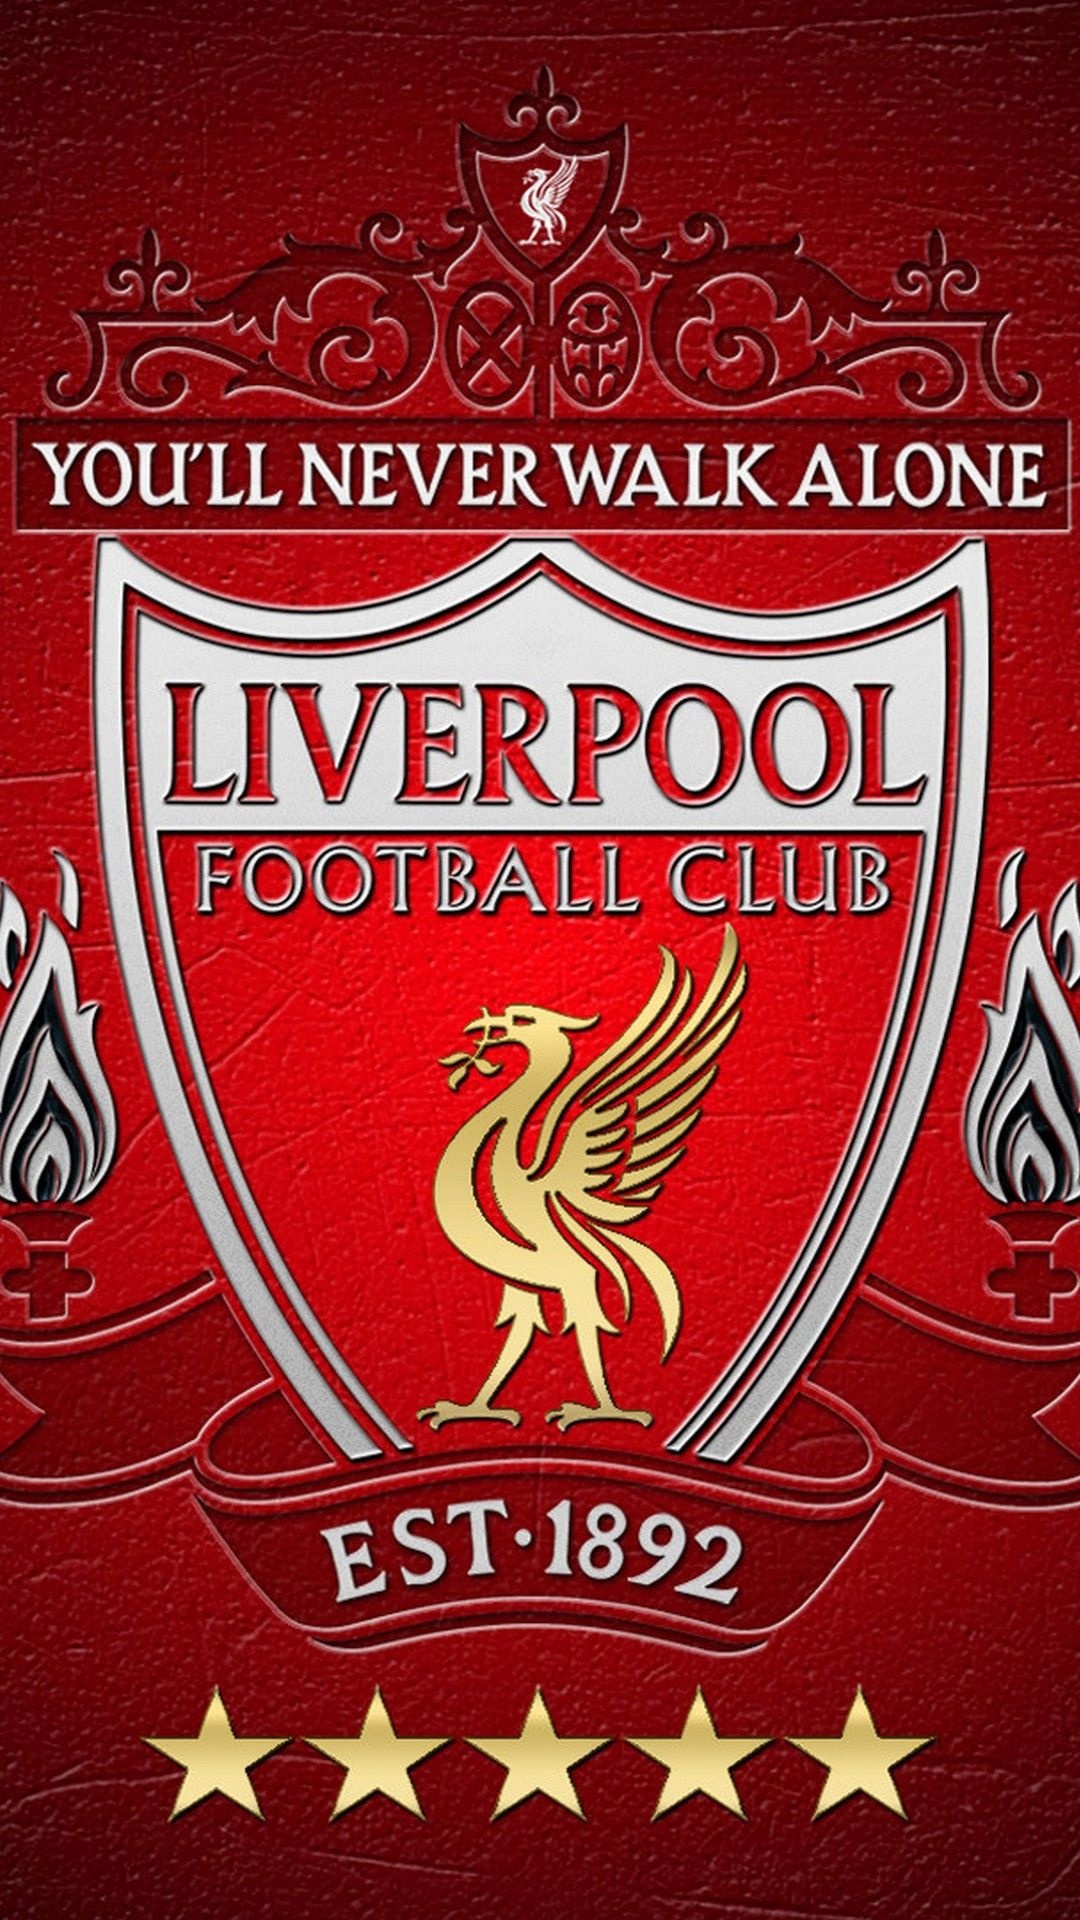 Liverpool Football Club: One of the most successful top-flight clubs in English soccer. 1080x1920 Full HD Wallpaper.